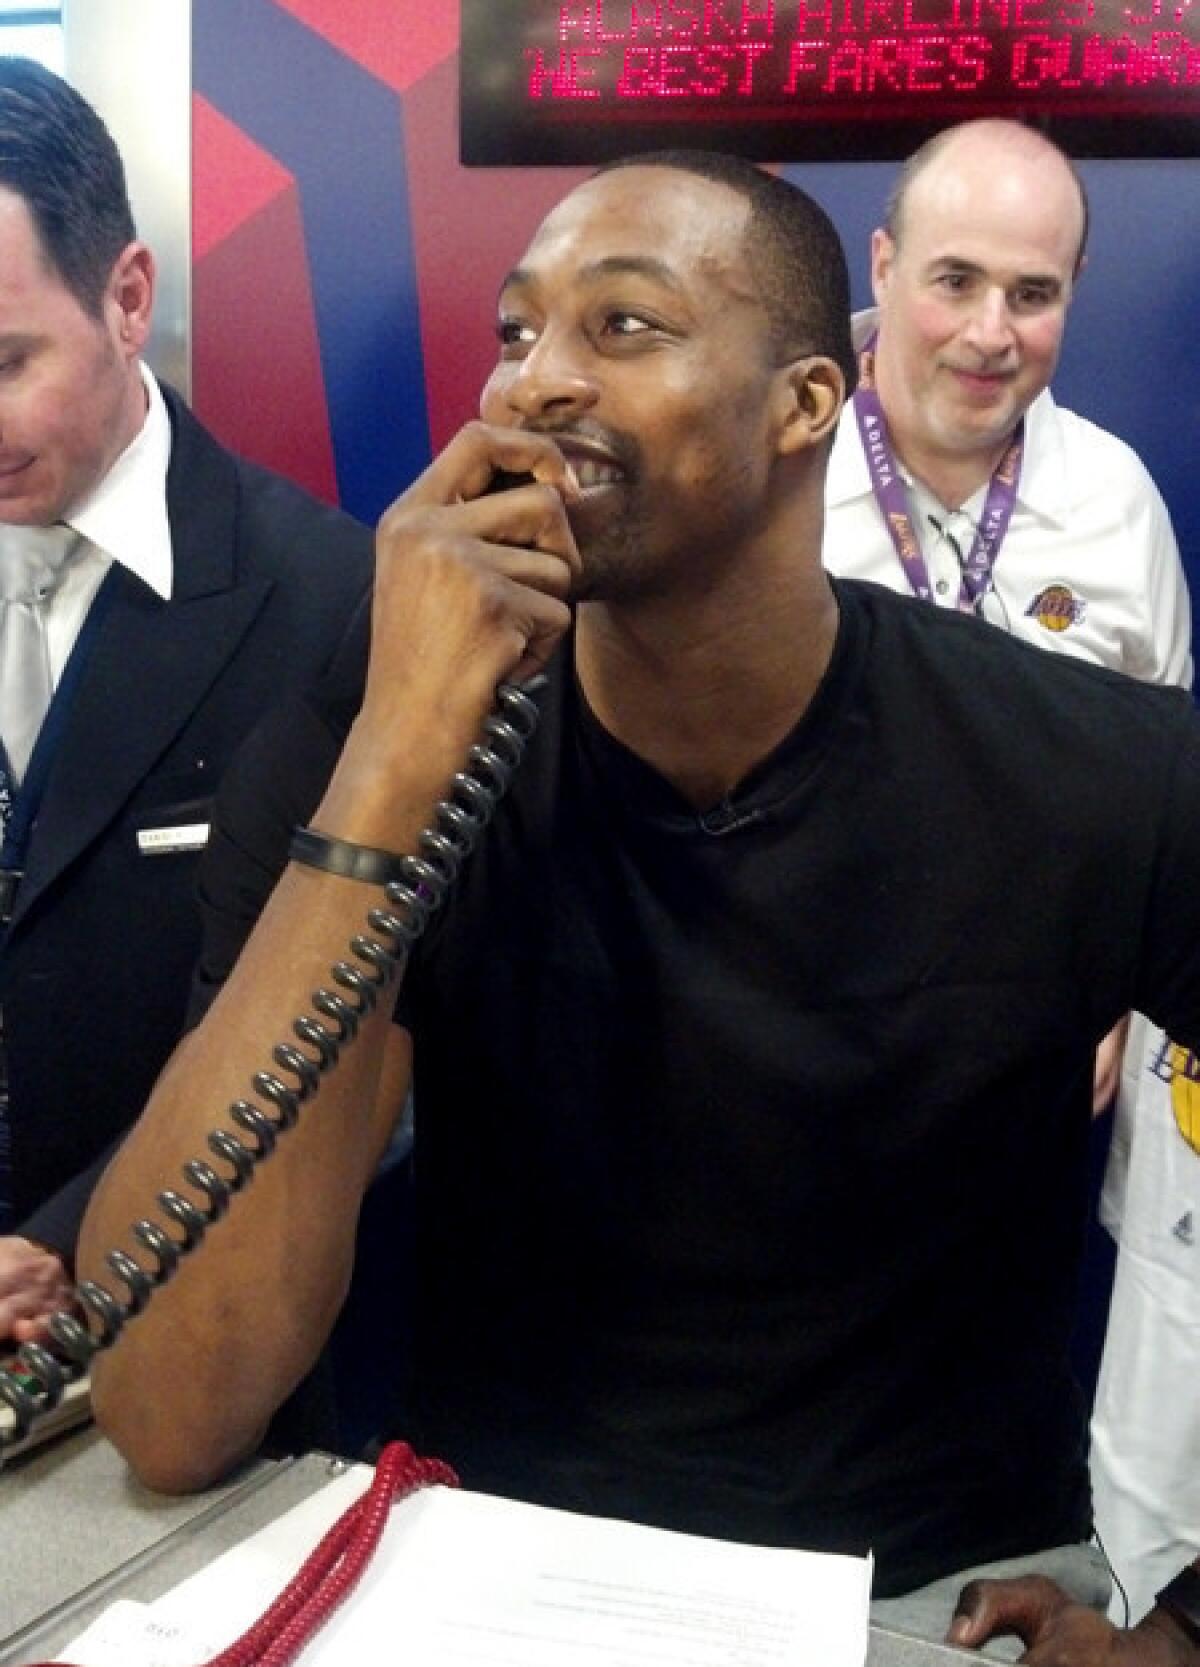 Lakers center Dwight Howard makes boarding announcements at a Delta Air Lines counter before Flight 1553 to Honolulu on Thursday.